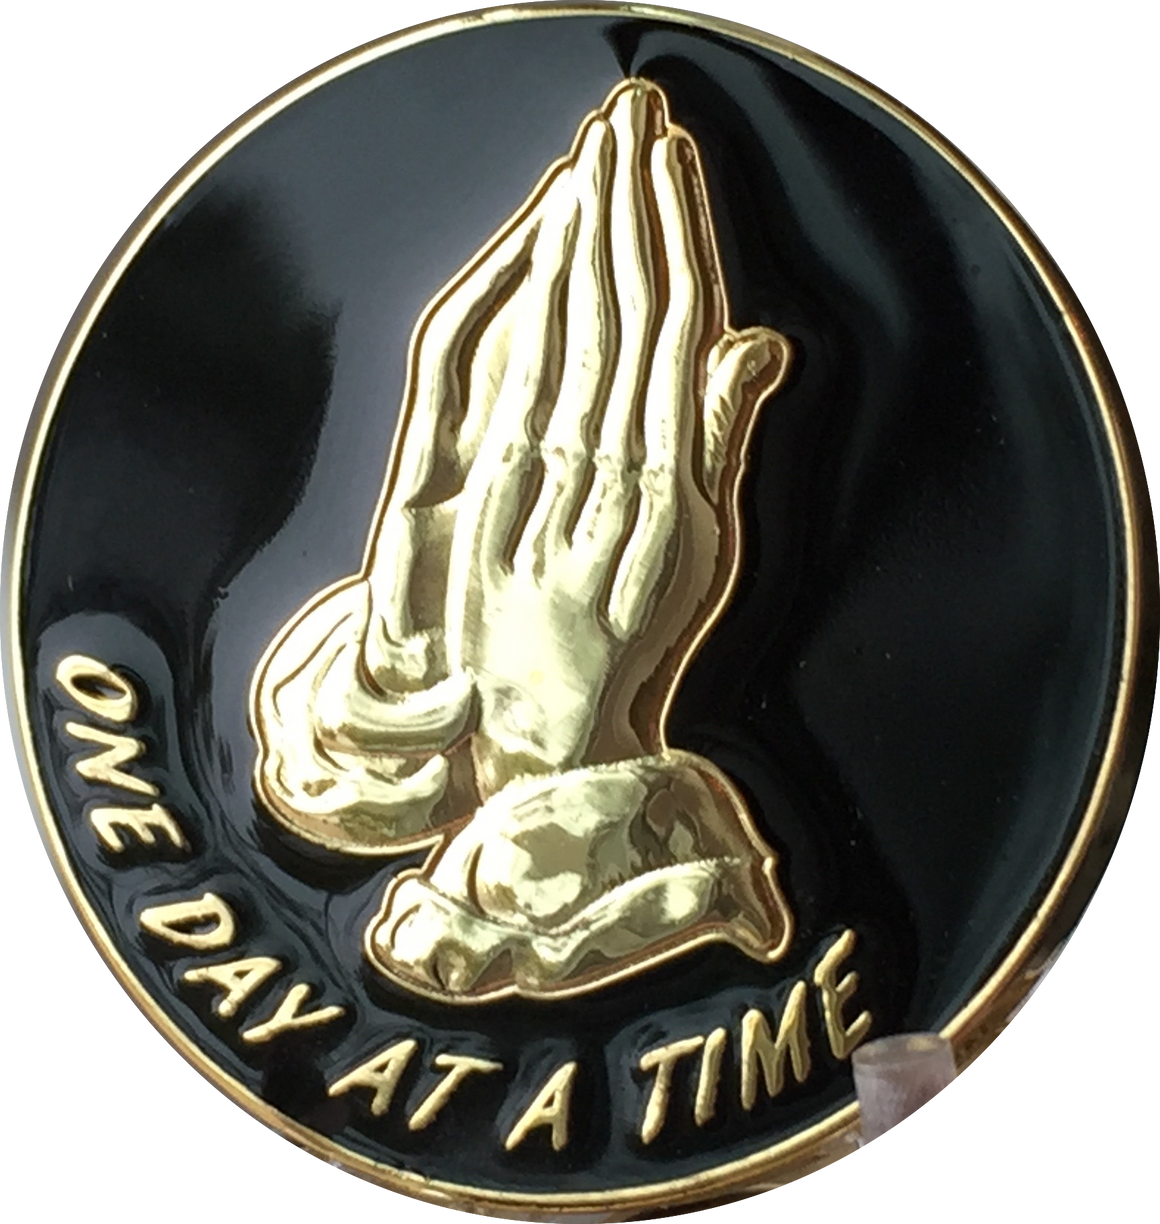 Praying Hands Black And Gold Plated One Day At A Time Medallion Sobriety Recoverychip 2926